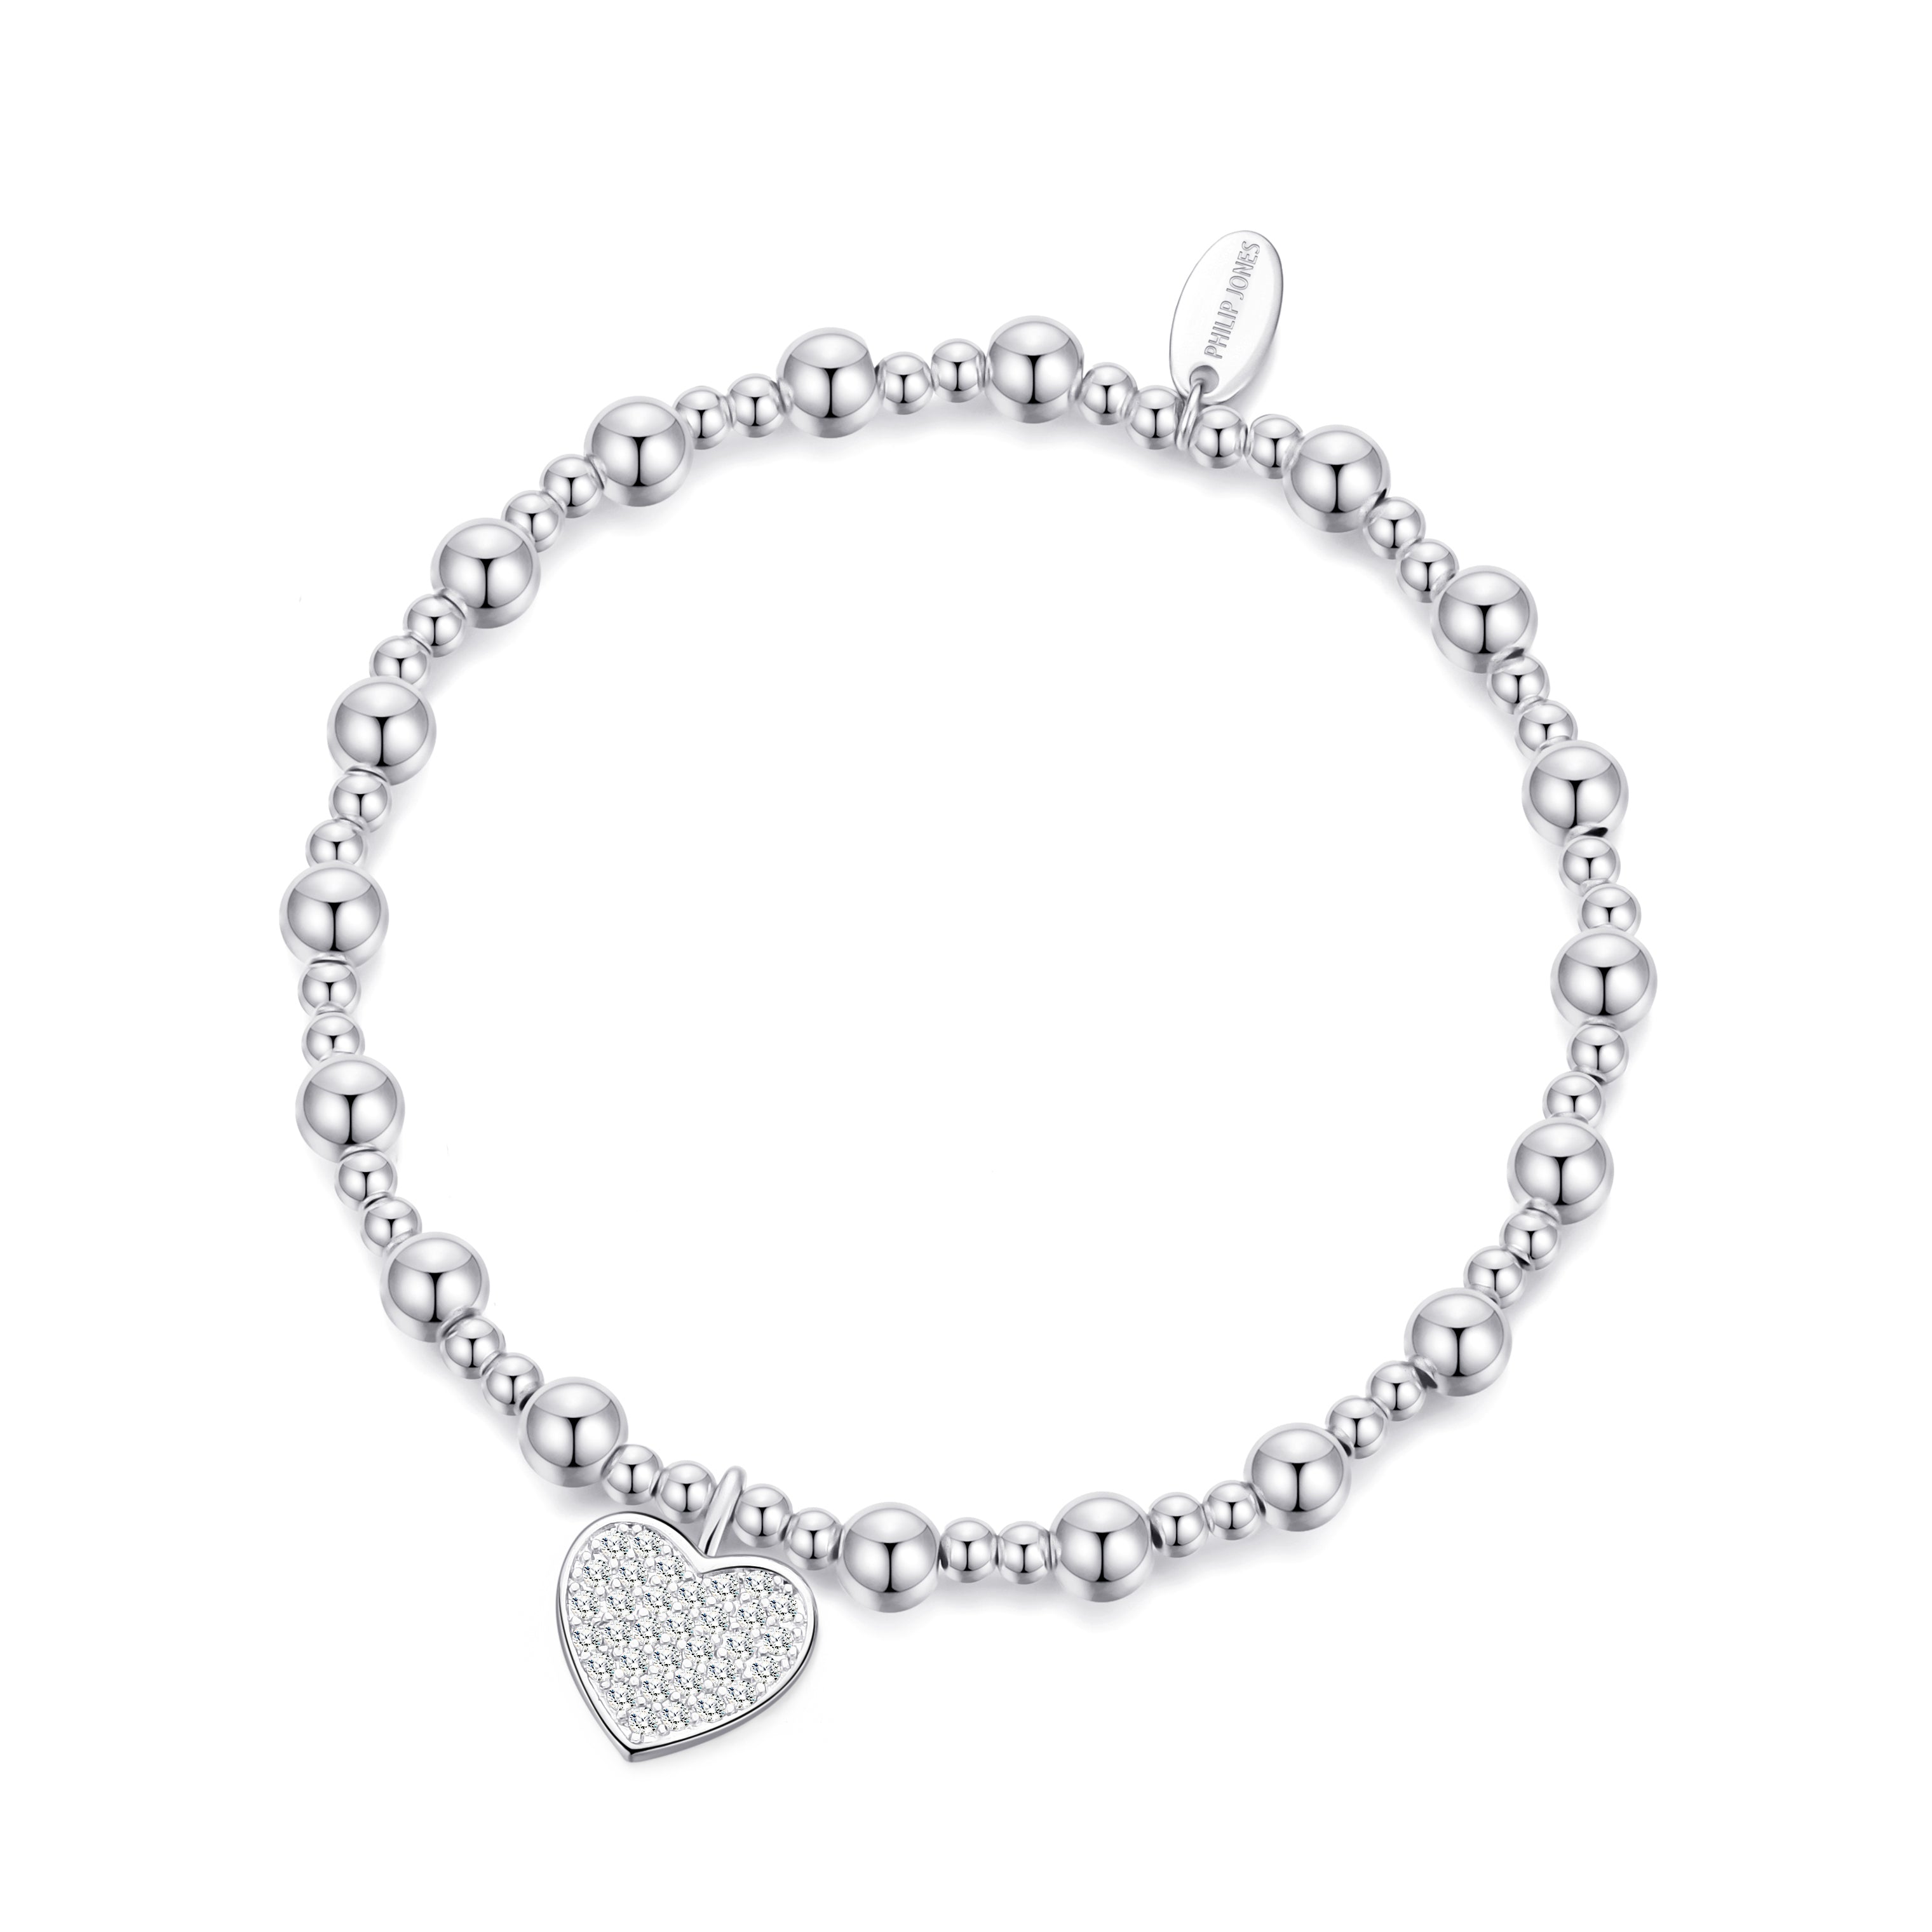 30th Birthday Heart Charm Stretch Bracelet with Quote Gift Box